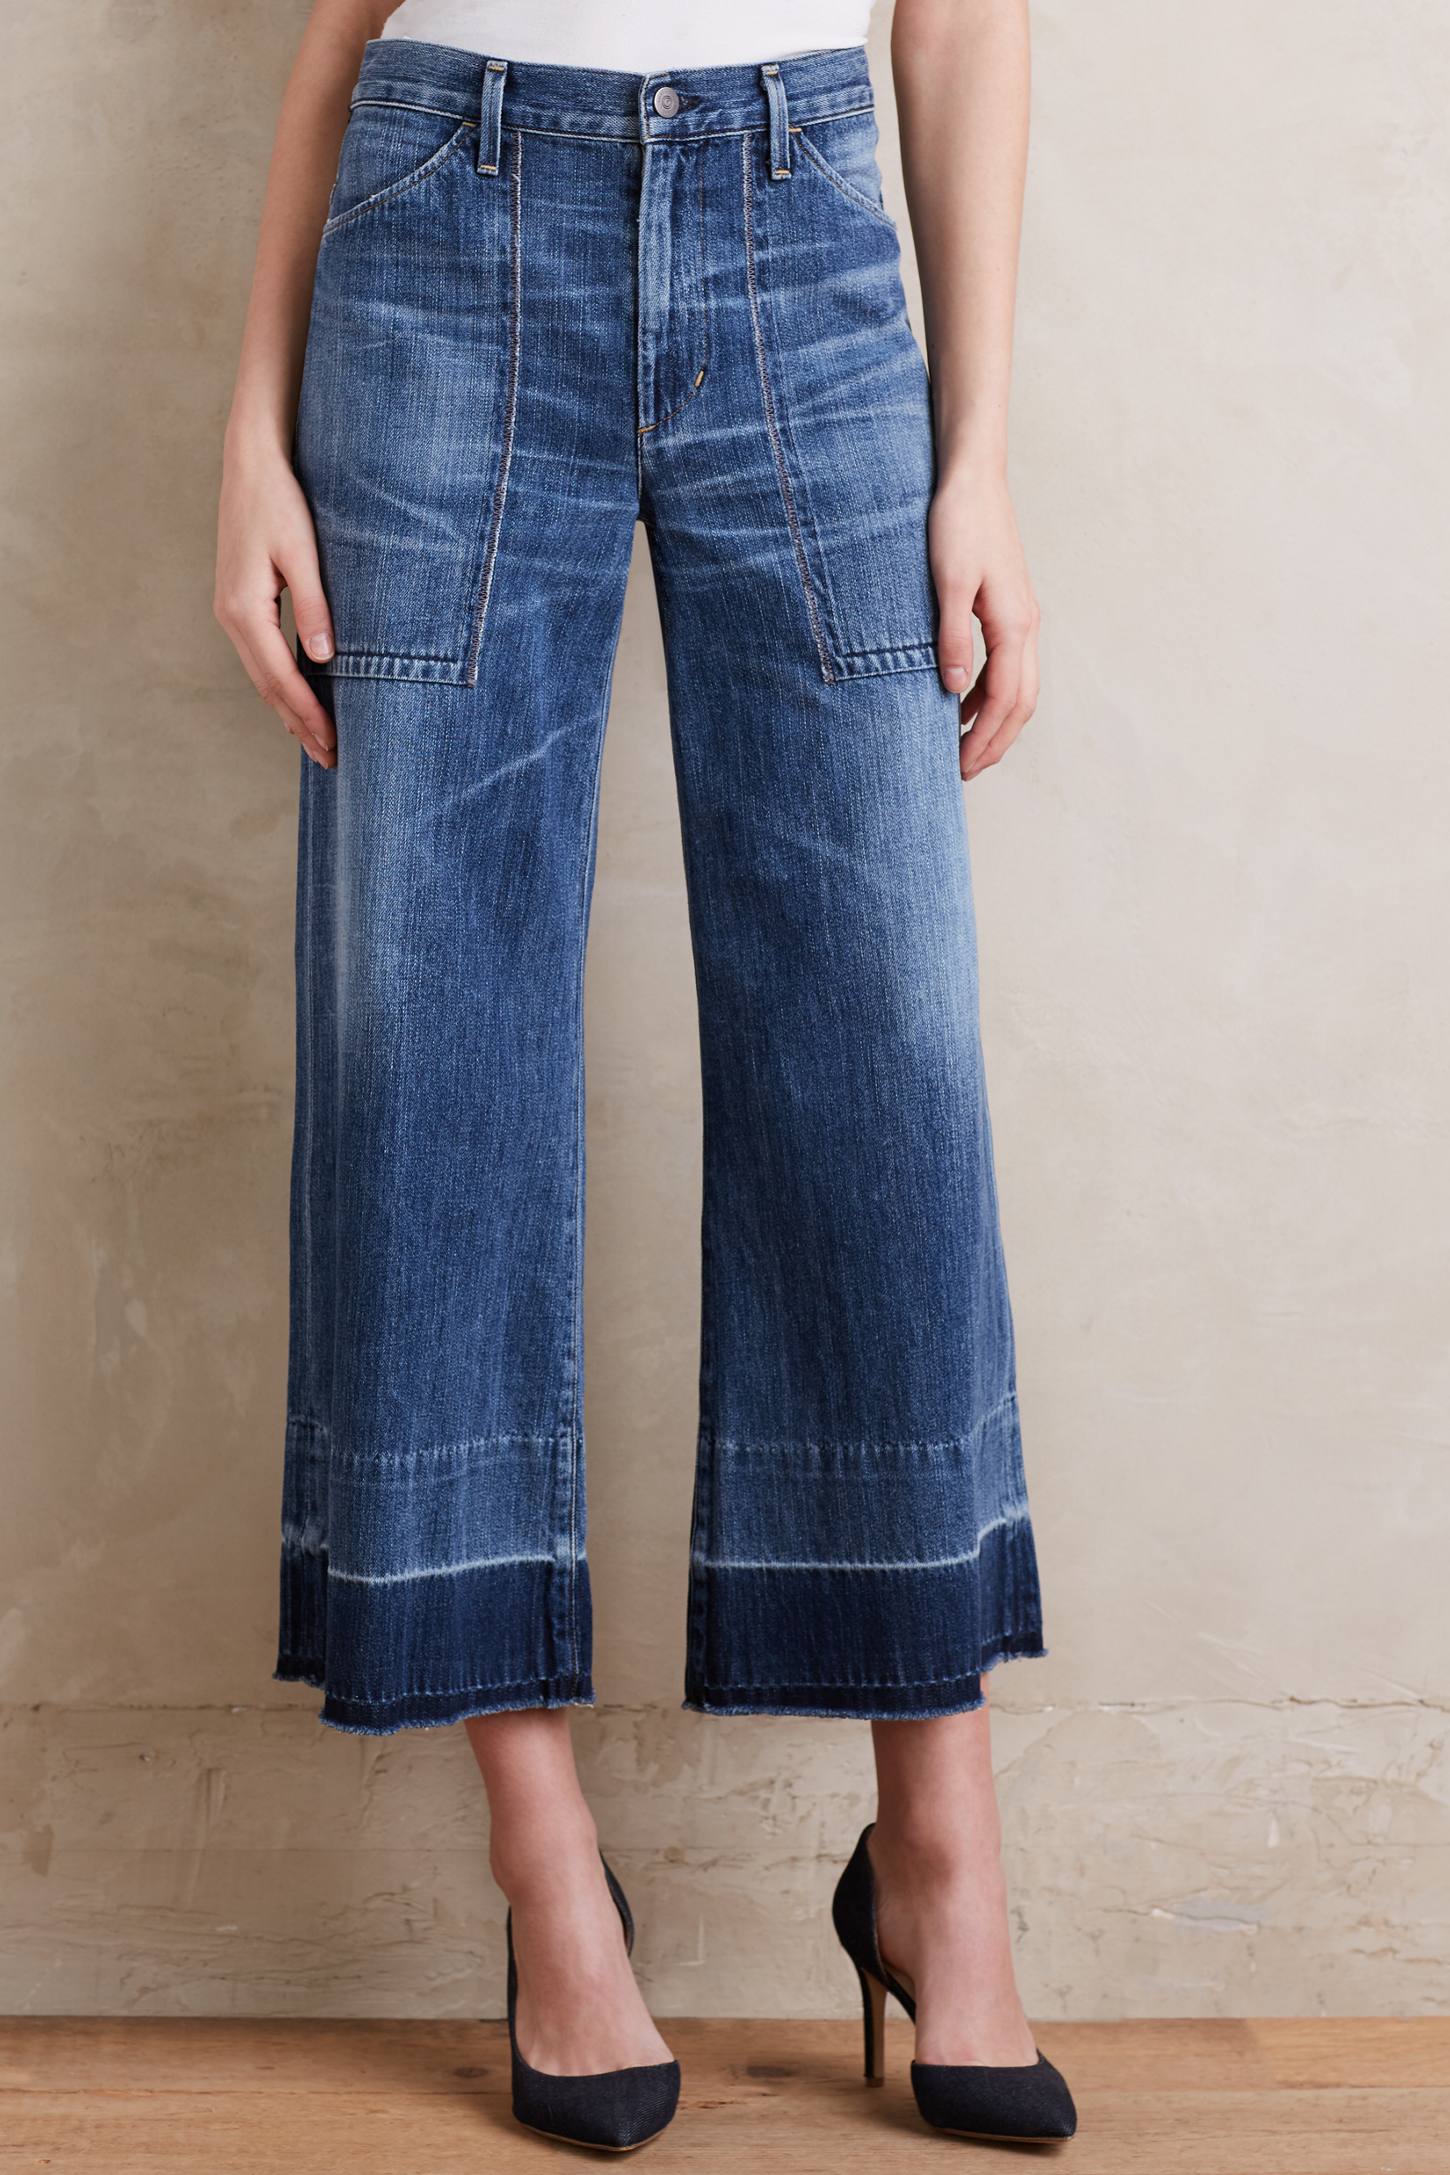 Citizens of Humanity Melanie High-Rise Wide-Leg Jeans | Anthropologie